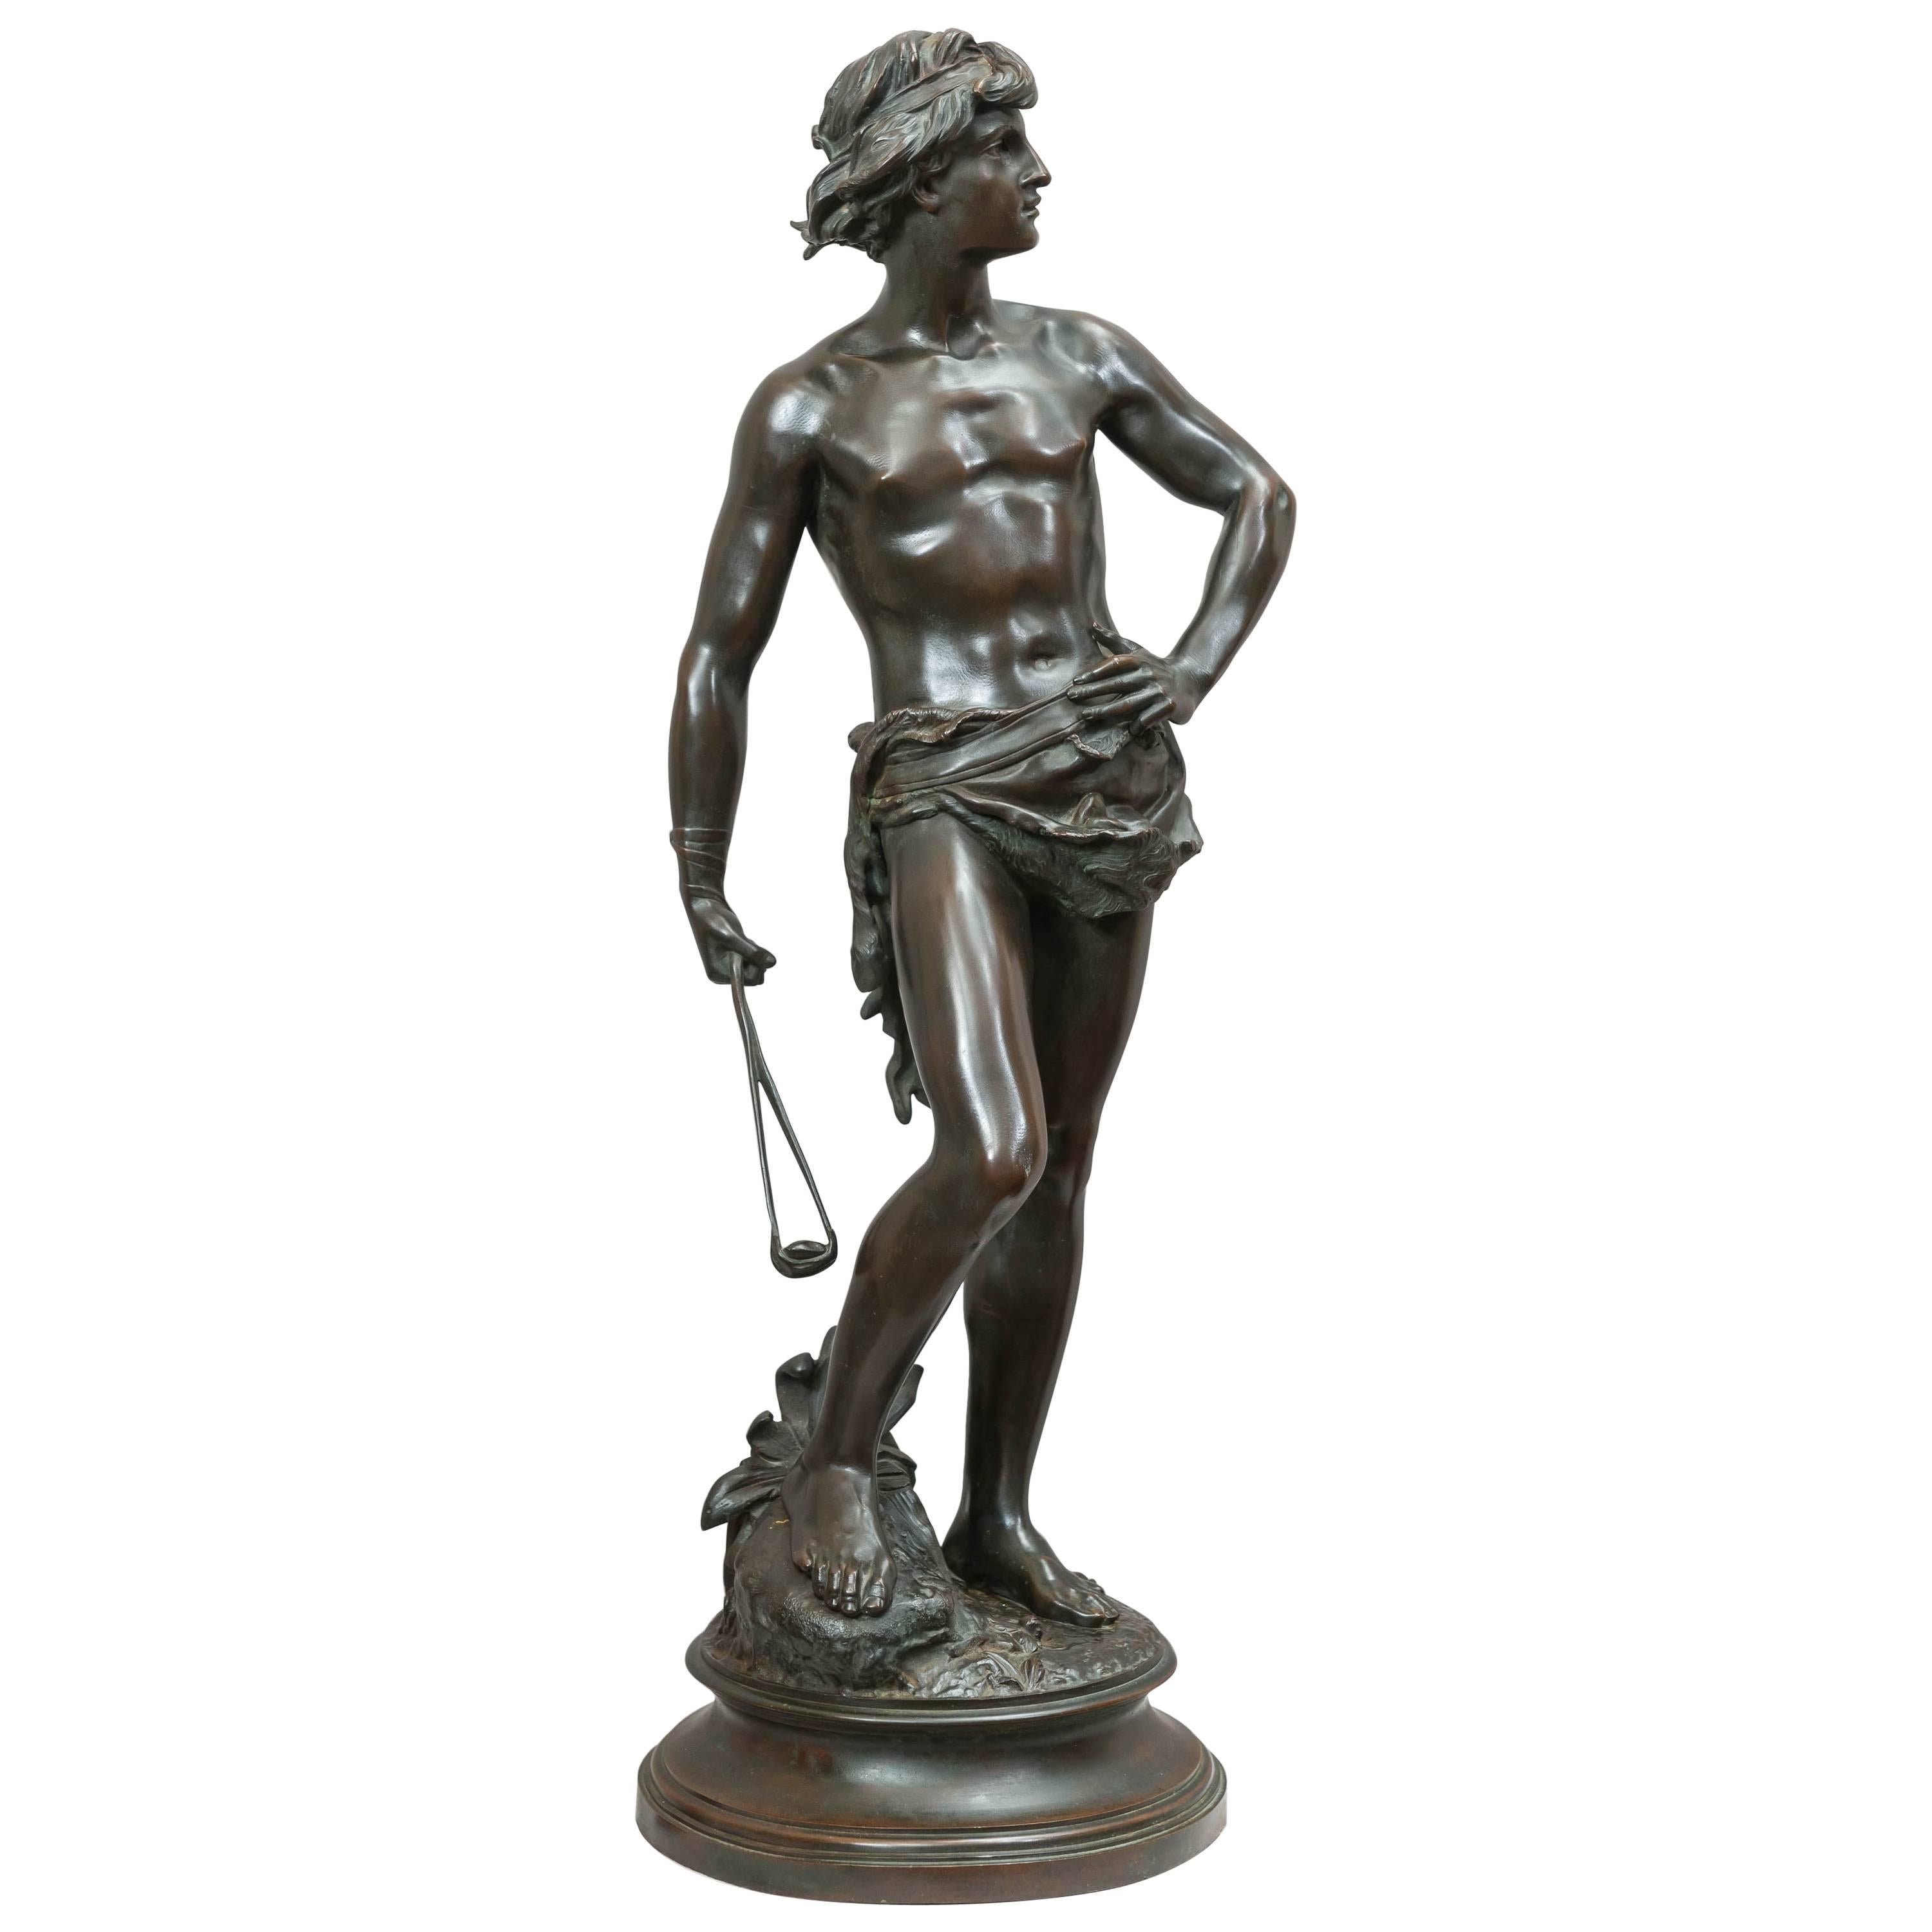 Antique Bronze of David Holding His Slingshot Ready for Action